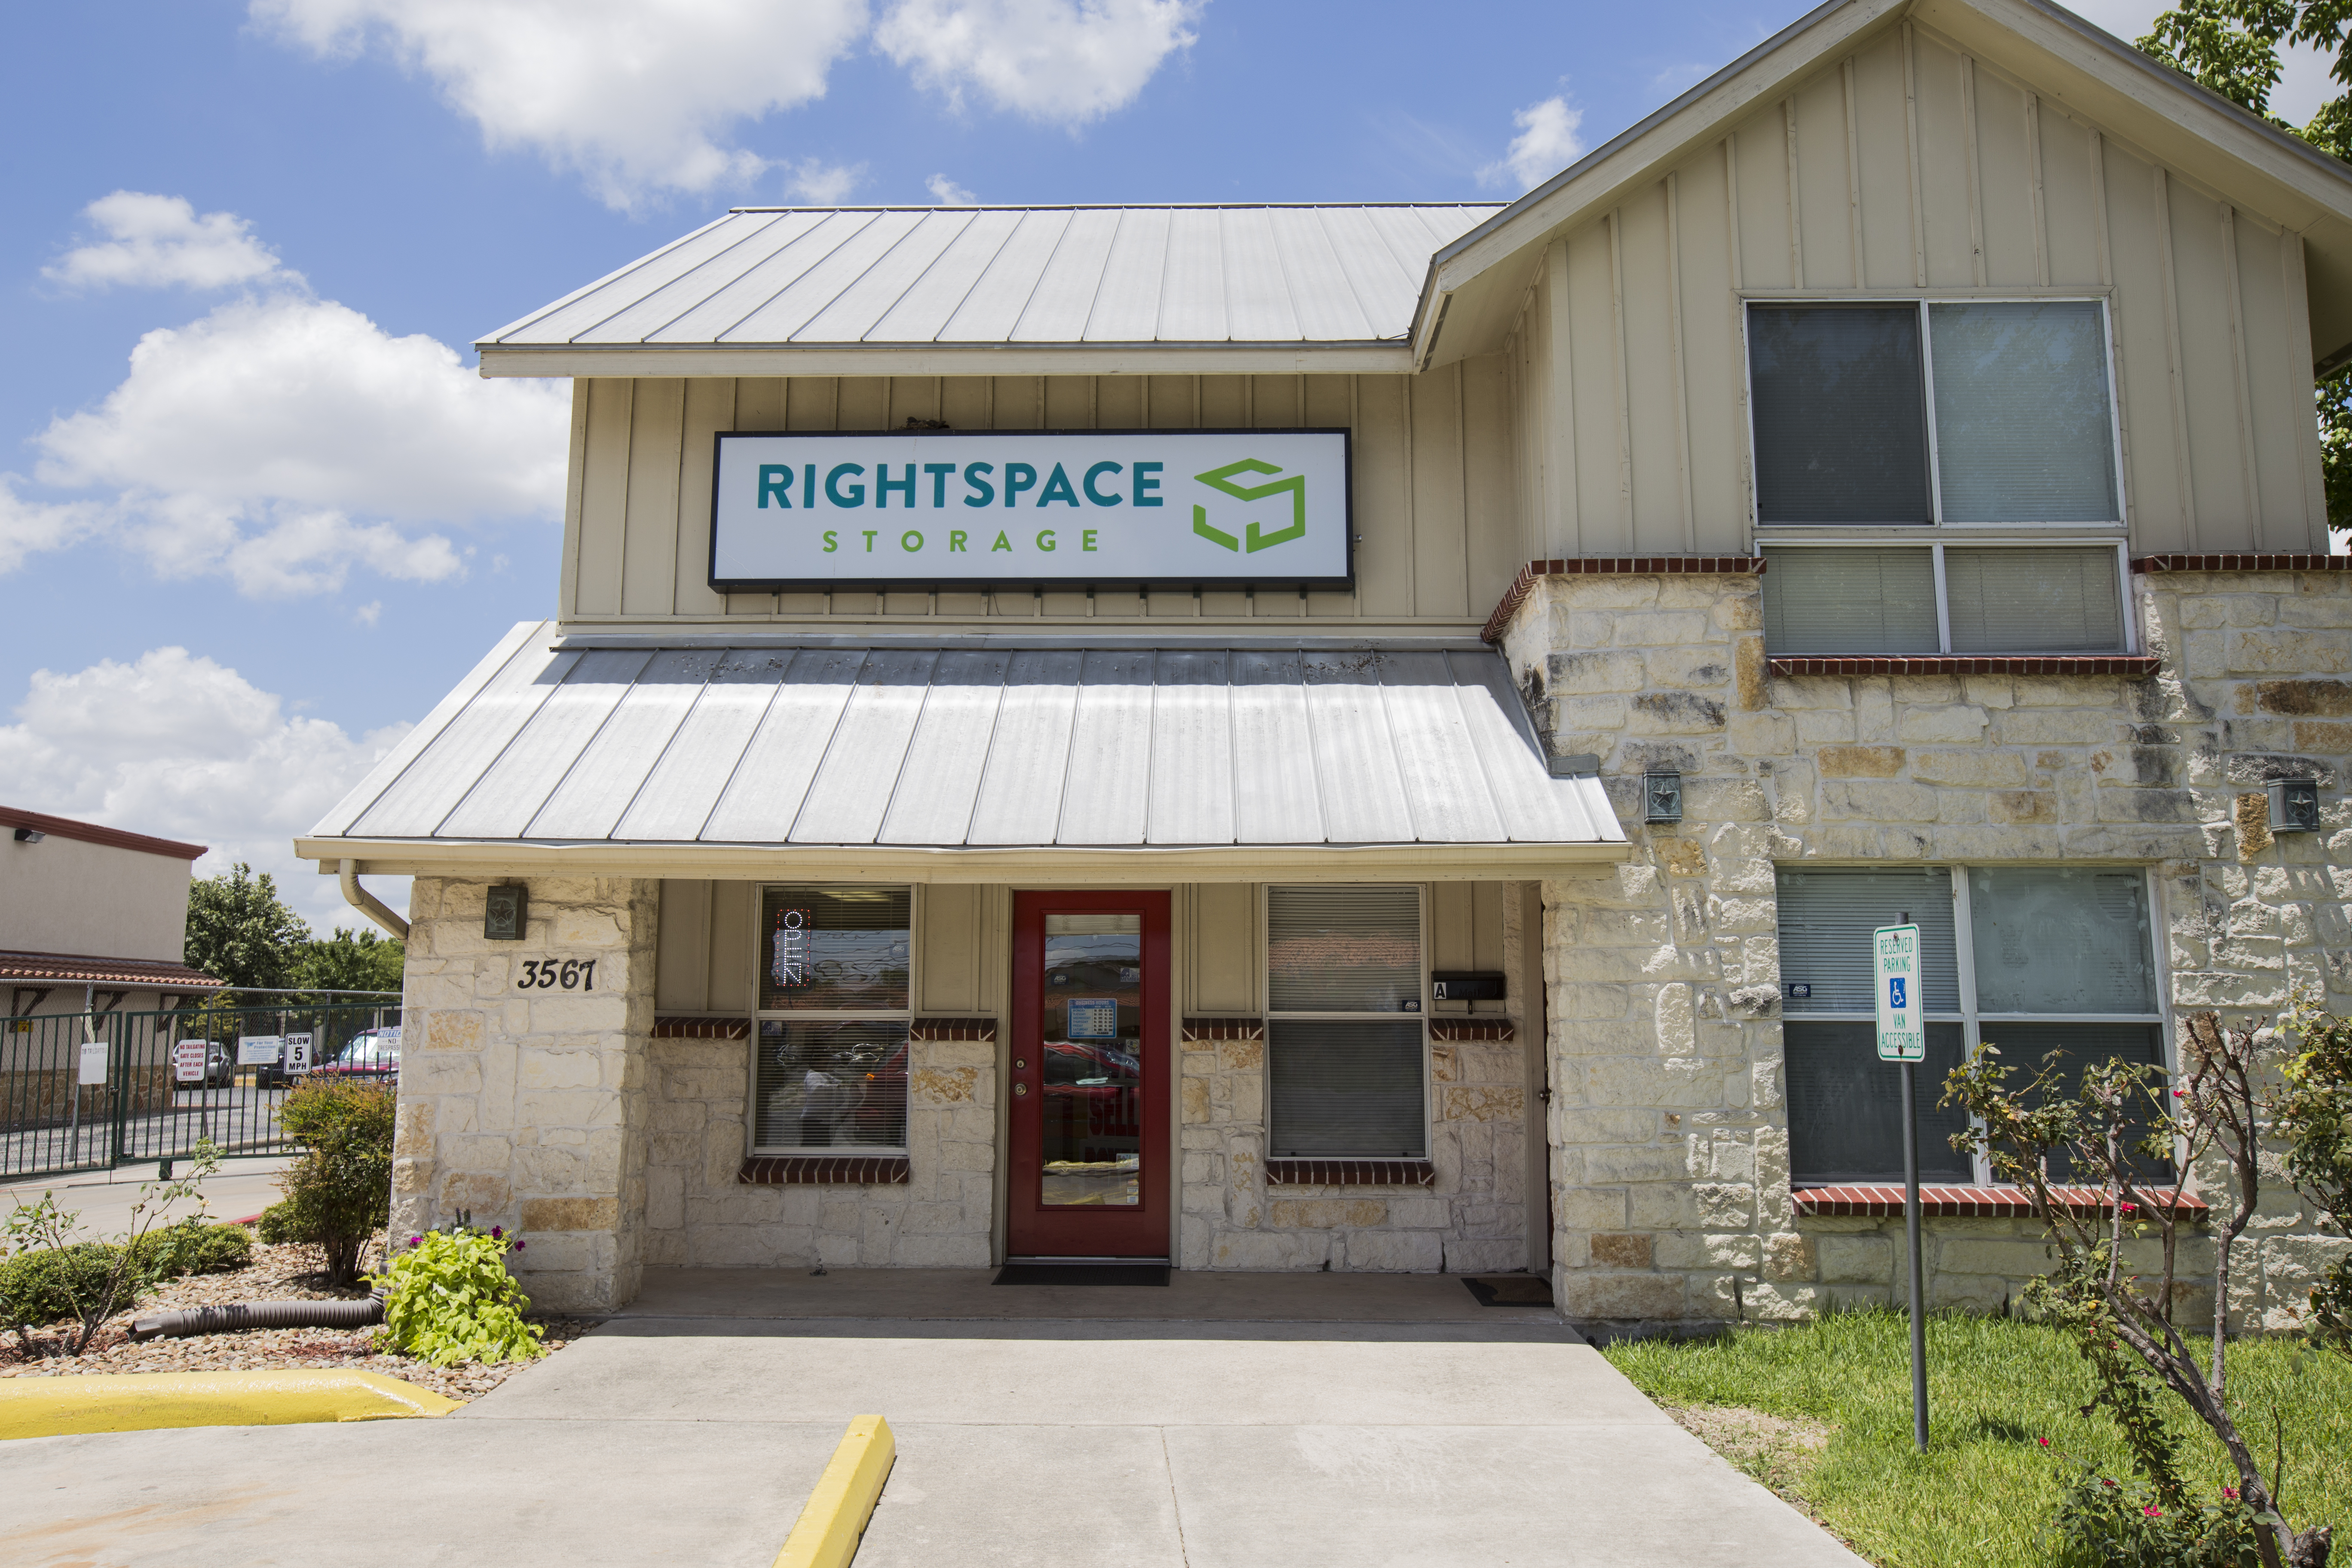 RightSpace Storage office entrance.